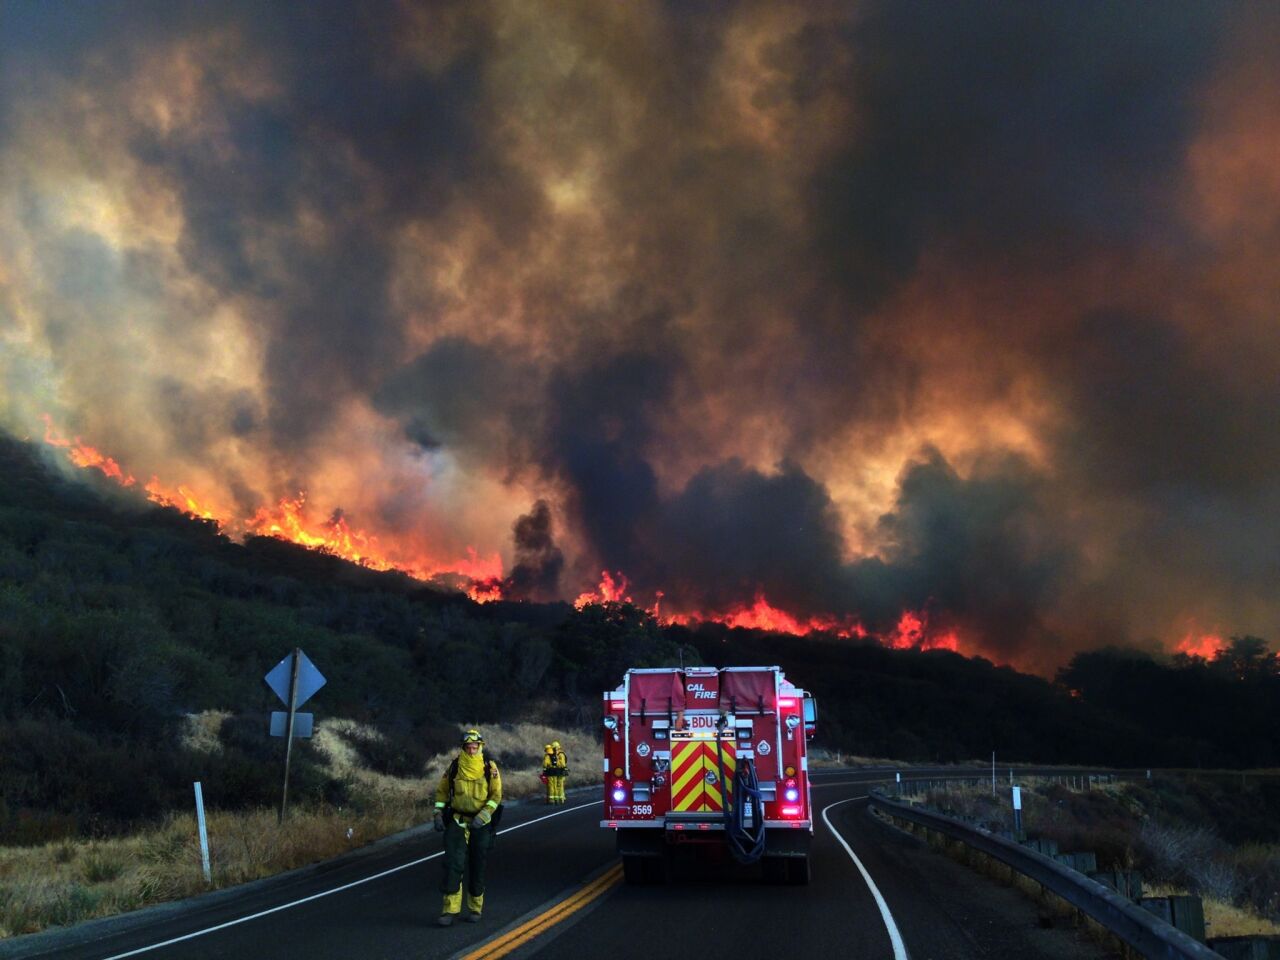 The Ortega Highway was closed after the fire jumped the road. Dozens of homes were ordered evacuated.